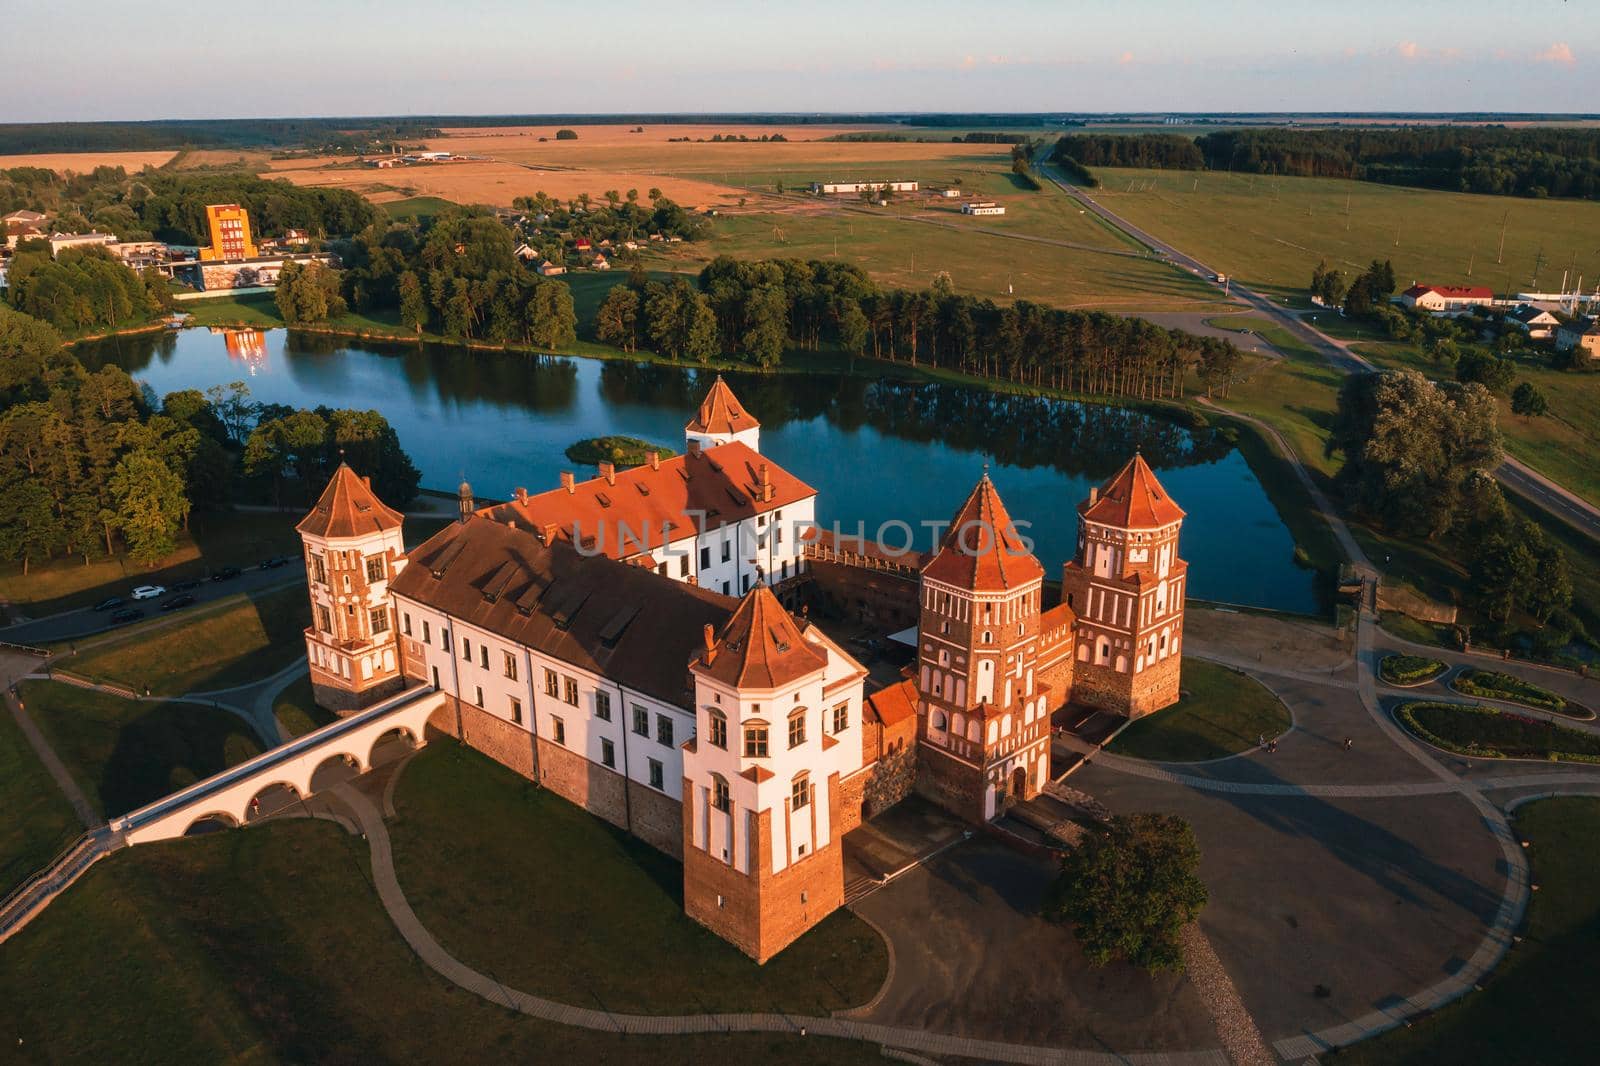 Mir castle with spires near the lake top view in Belarus near the city of Mir.